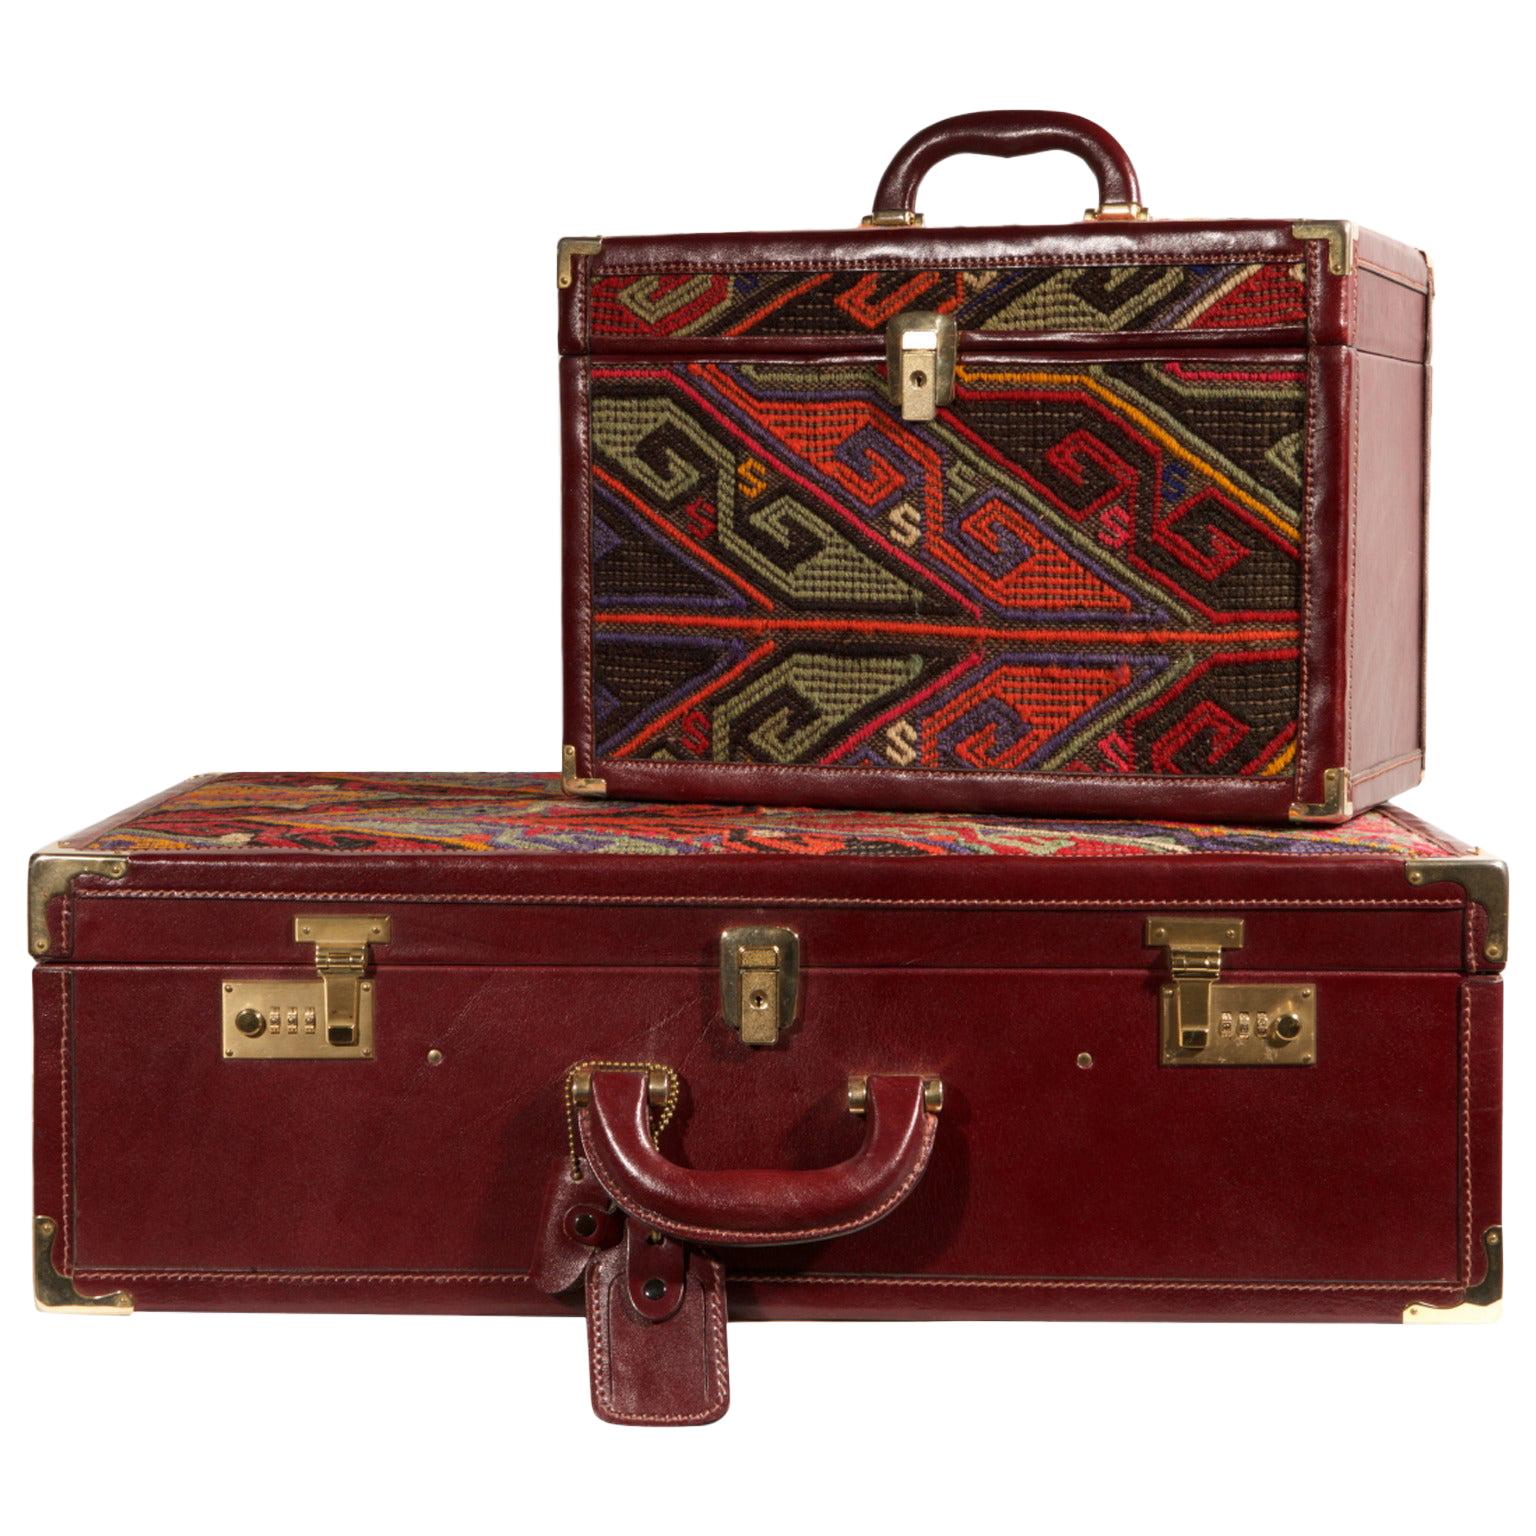 SET Suitcase and Beauty Case with Kilim, Vuitton Model For Sale